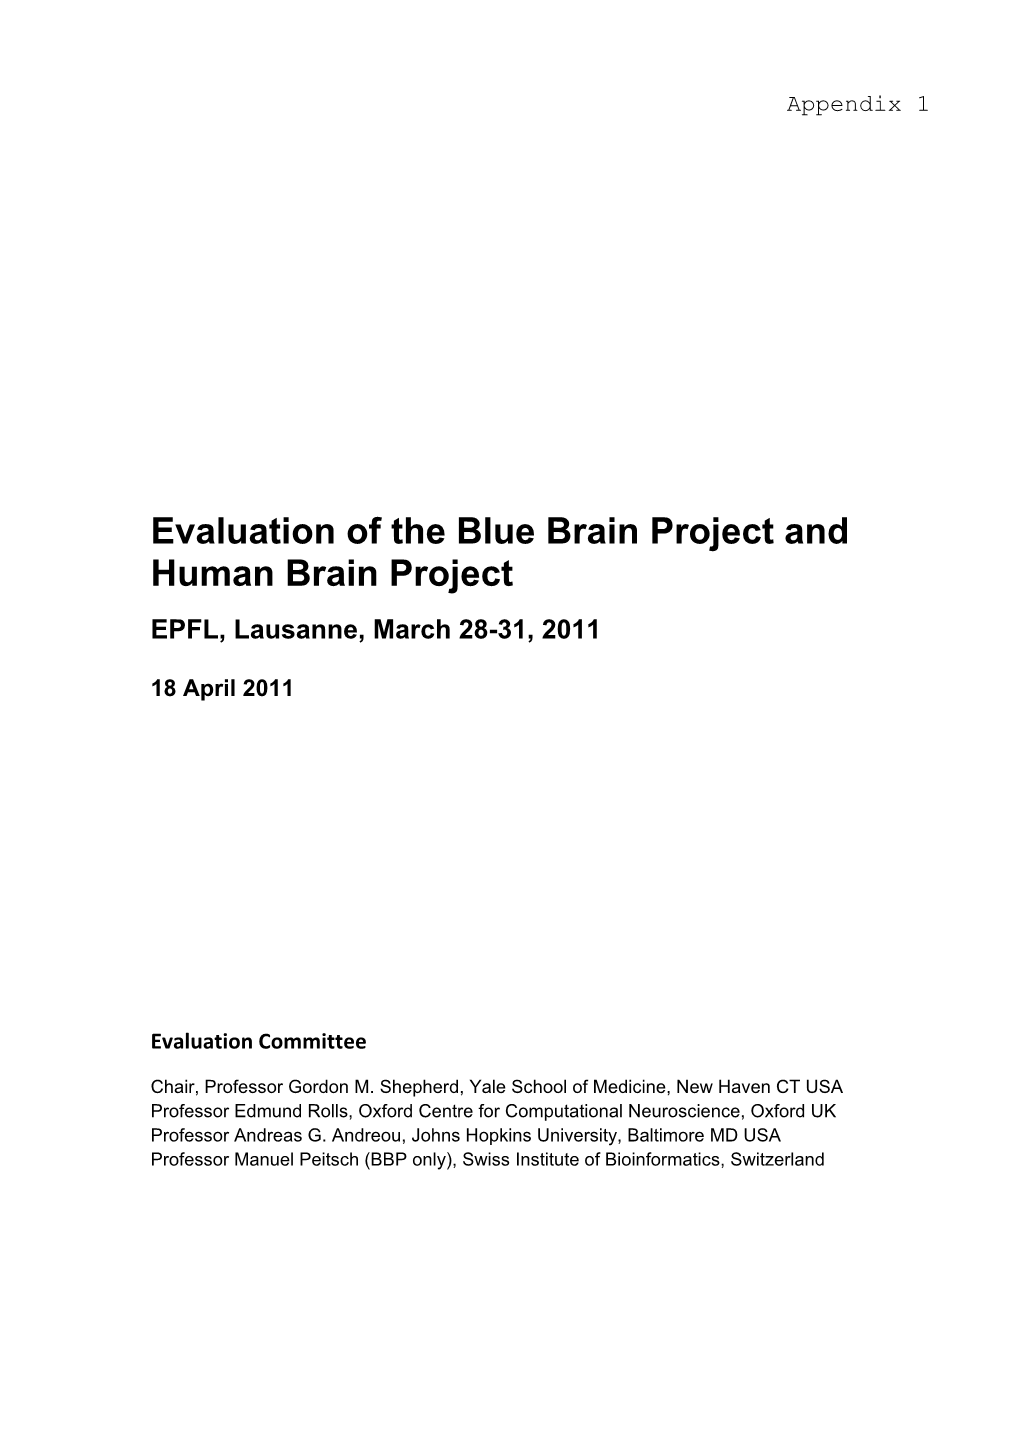 Evaluation of the Blue Brain Project and Human Brain Project EPFL, Lausanne, March 28-31, 2011